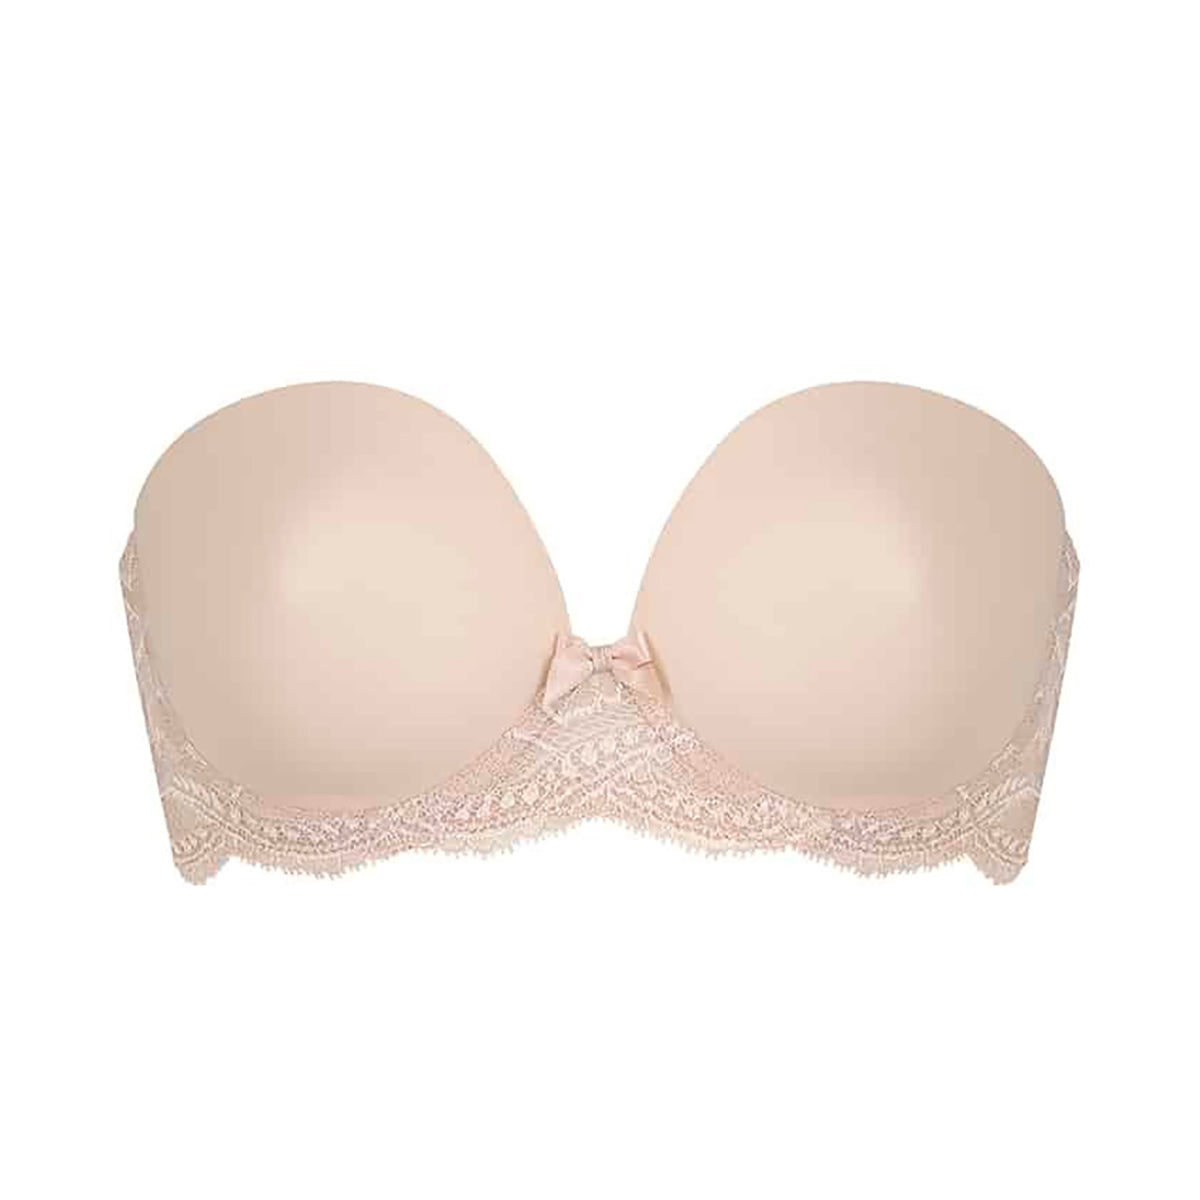 Buy Nude Invisible Finish Seamless Lace Bra 12, Bras